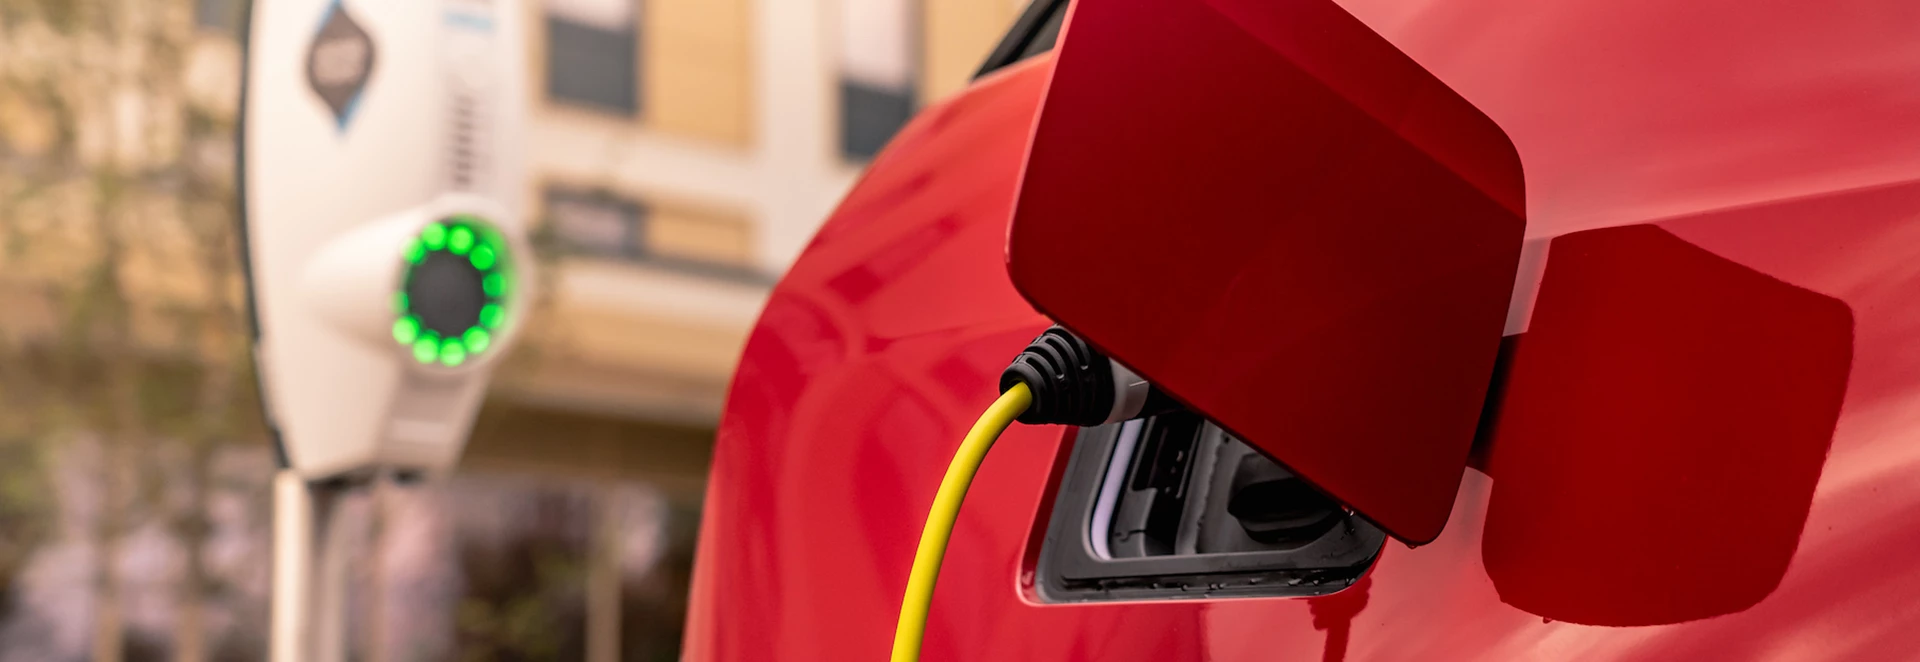 Electric car charging: What are your options? 